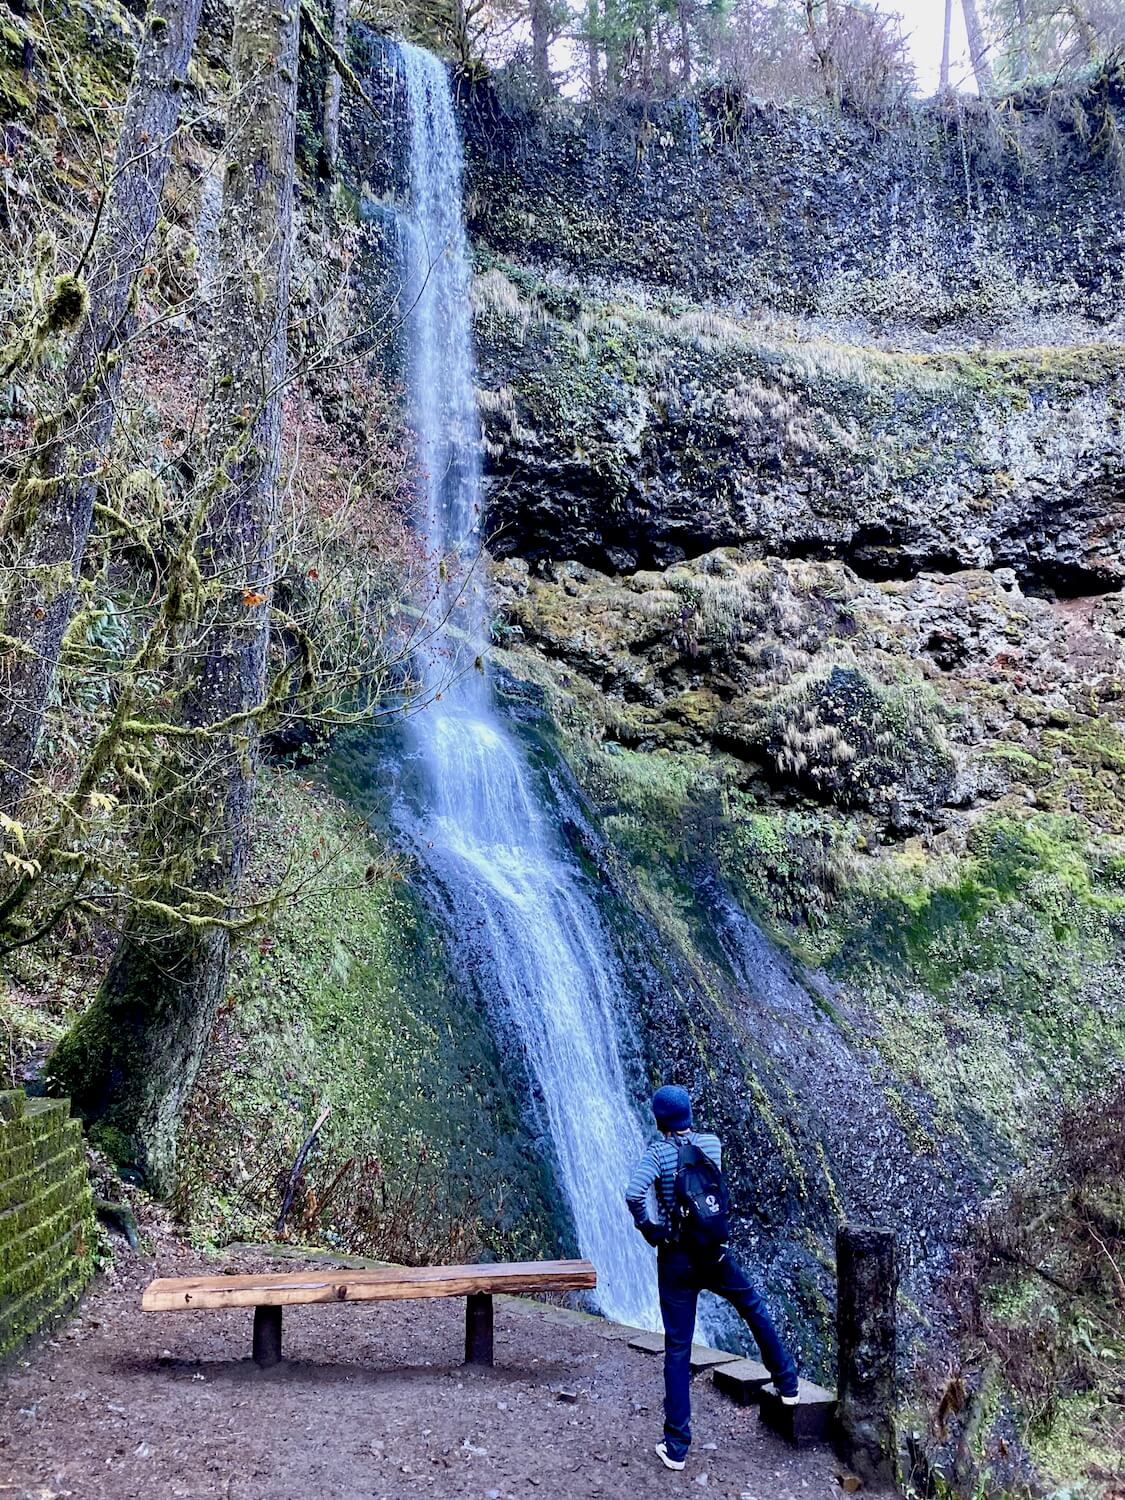 Winter Falls, in Silver Falls State Park in Oregon, gracefully flows down a steep cliff formed by volcanic rock thousands of years ago.  There is abundant moss and algae in the path of the flowing water as a hiker takes pause at the pool near the bottom of the waterfall.  